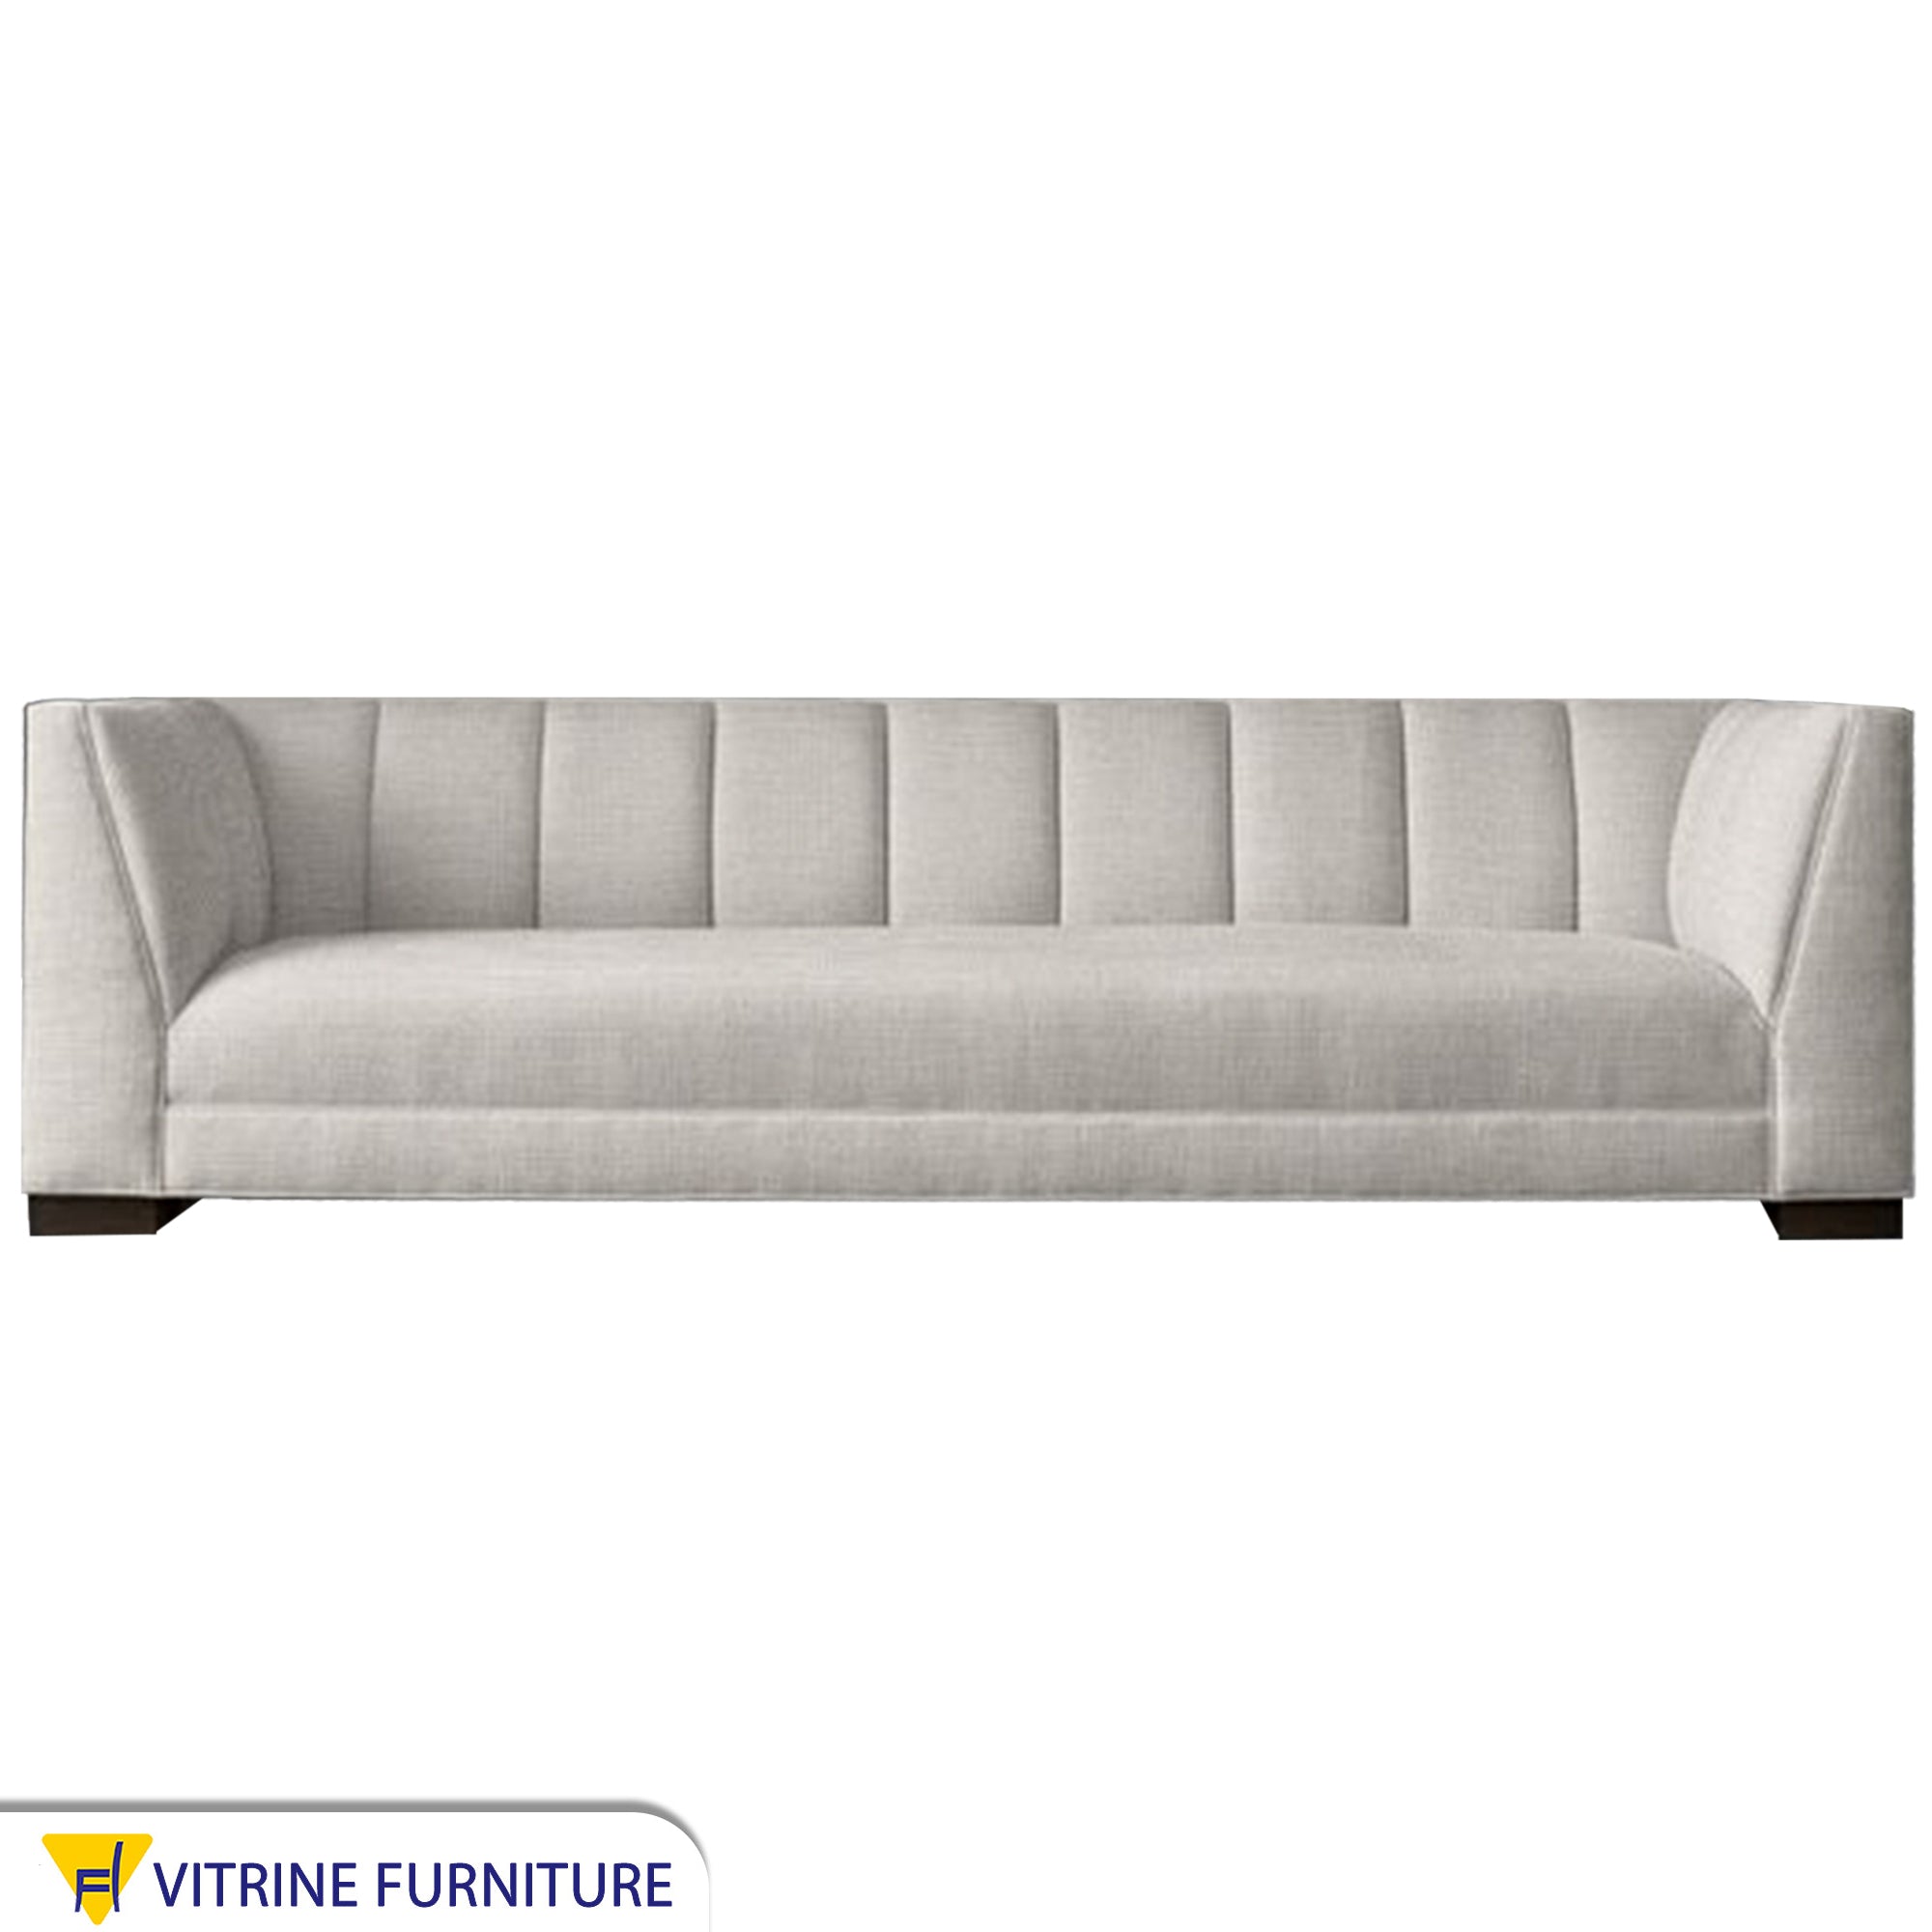 Sofa with recessed stitching with backrest in white color